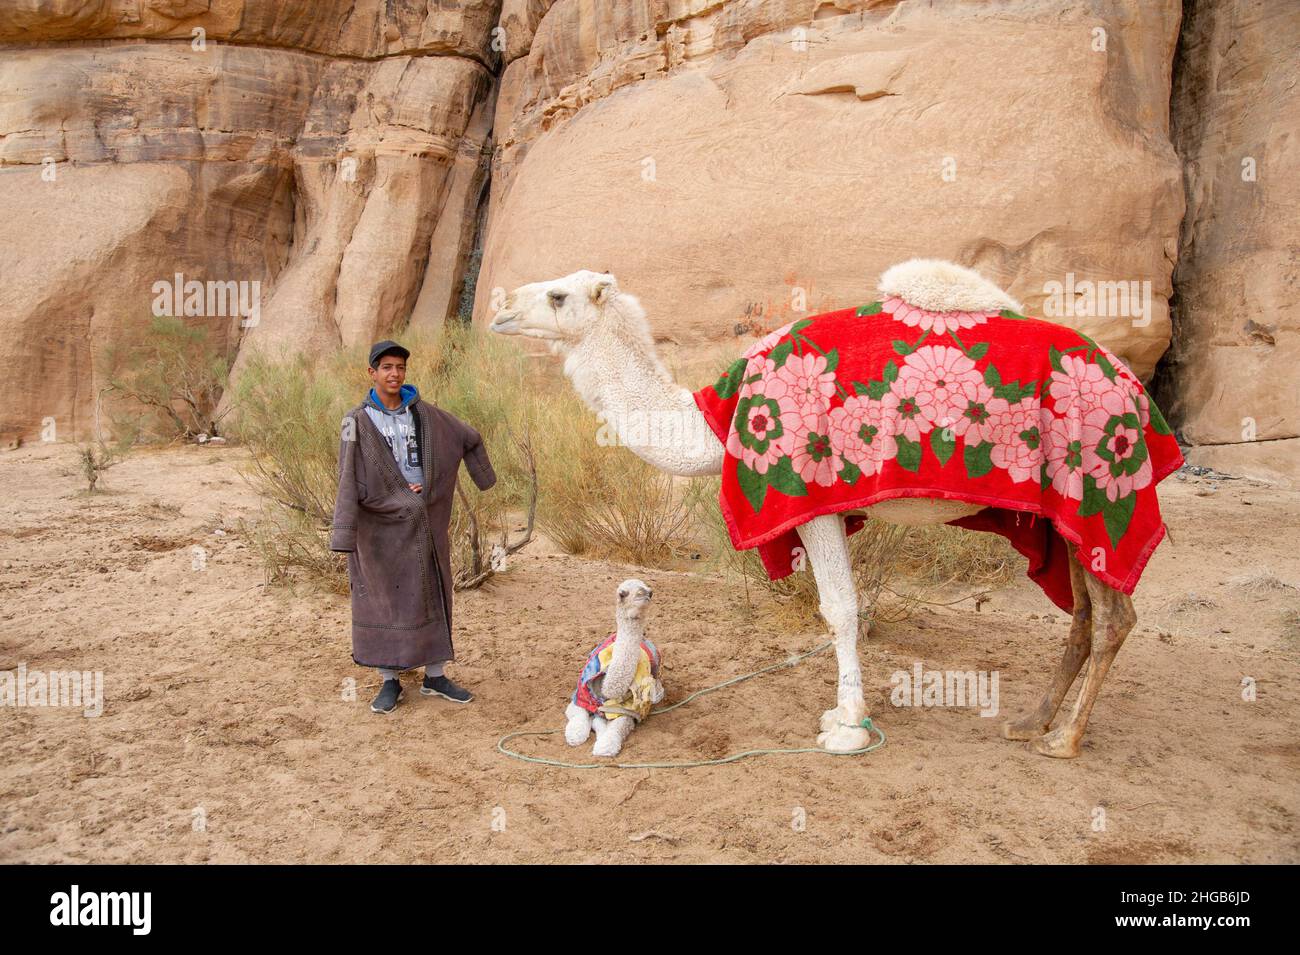 A day in the life of a young Bedouin man living from tourism in Jordan's Wadi rum desert on December 25, 2021 Stock Photo